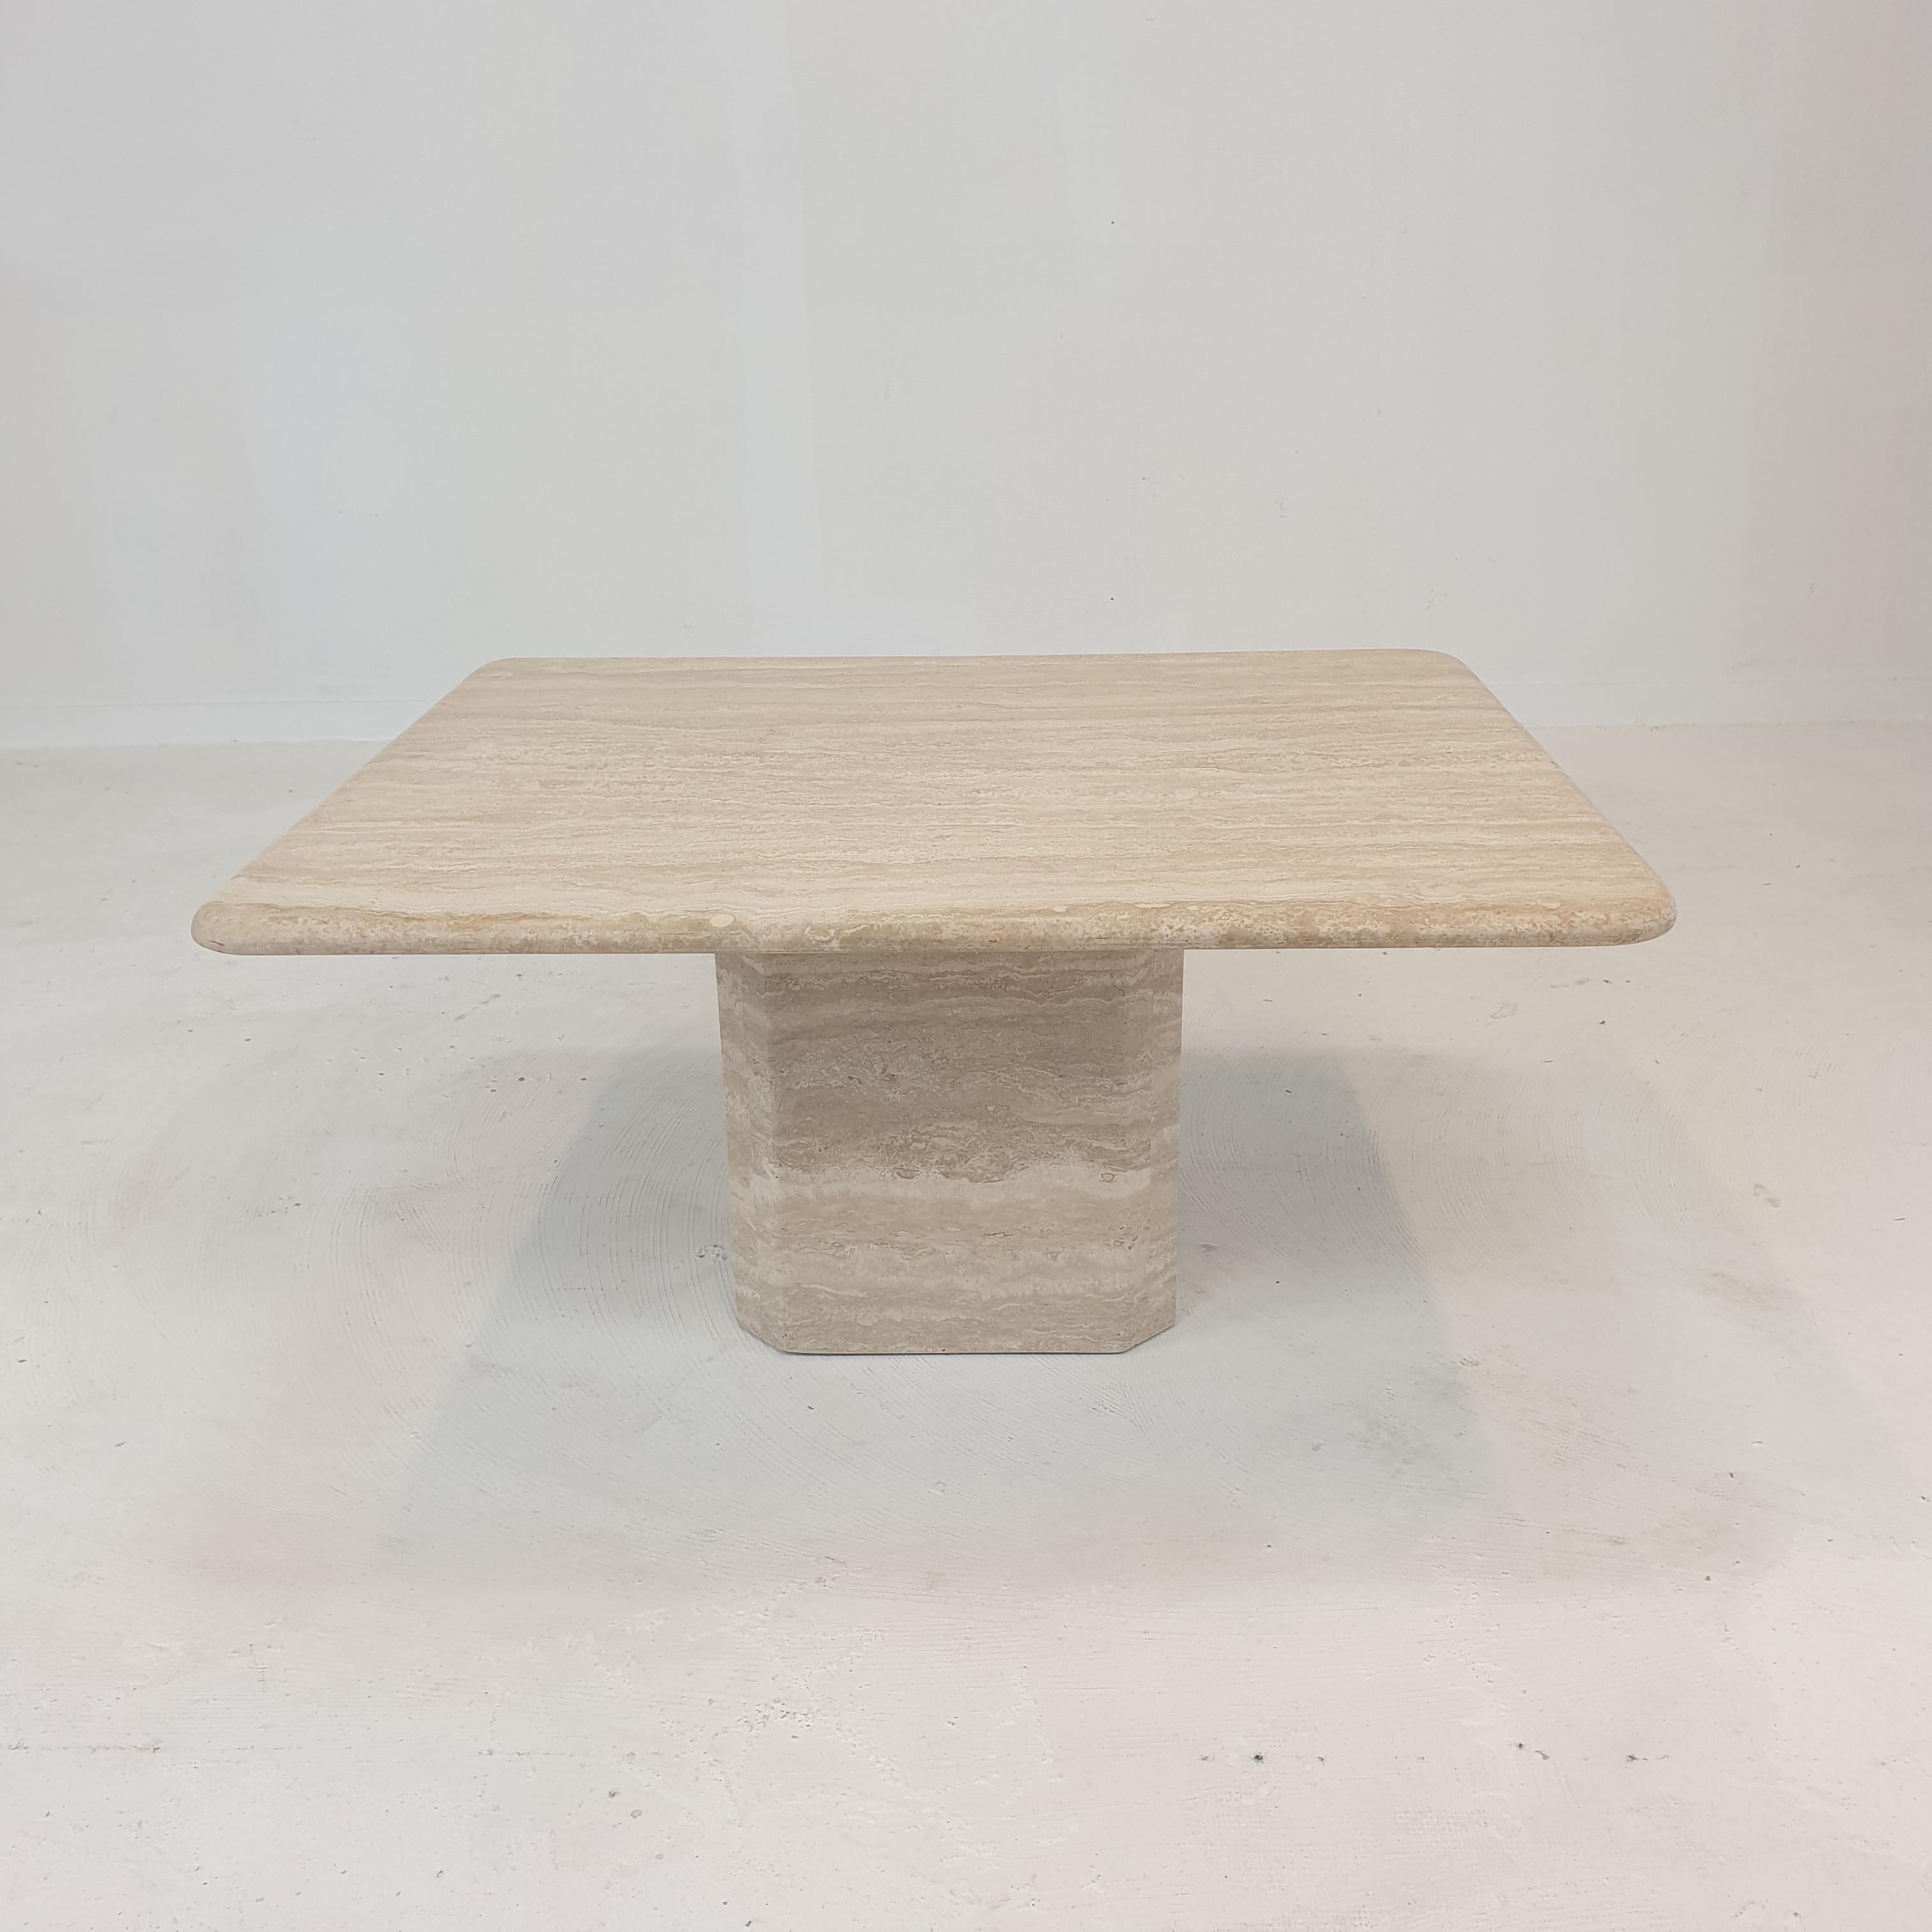 Very nice Italian coffee table handcrafted out of travertine, 1980's.

The beautiful top is rounded on the edge. 
It is made of beautiful travertine.

It has the normal traces of use, see the pictures.

We work with professional packers and